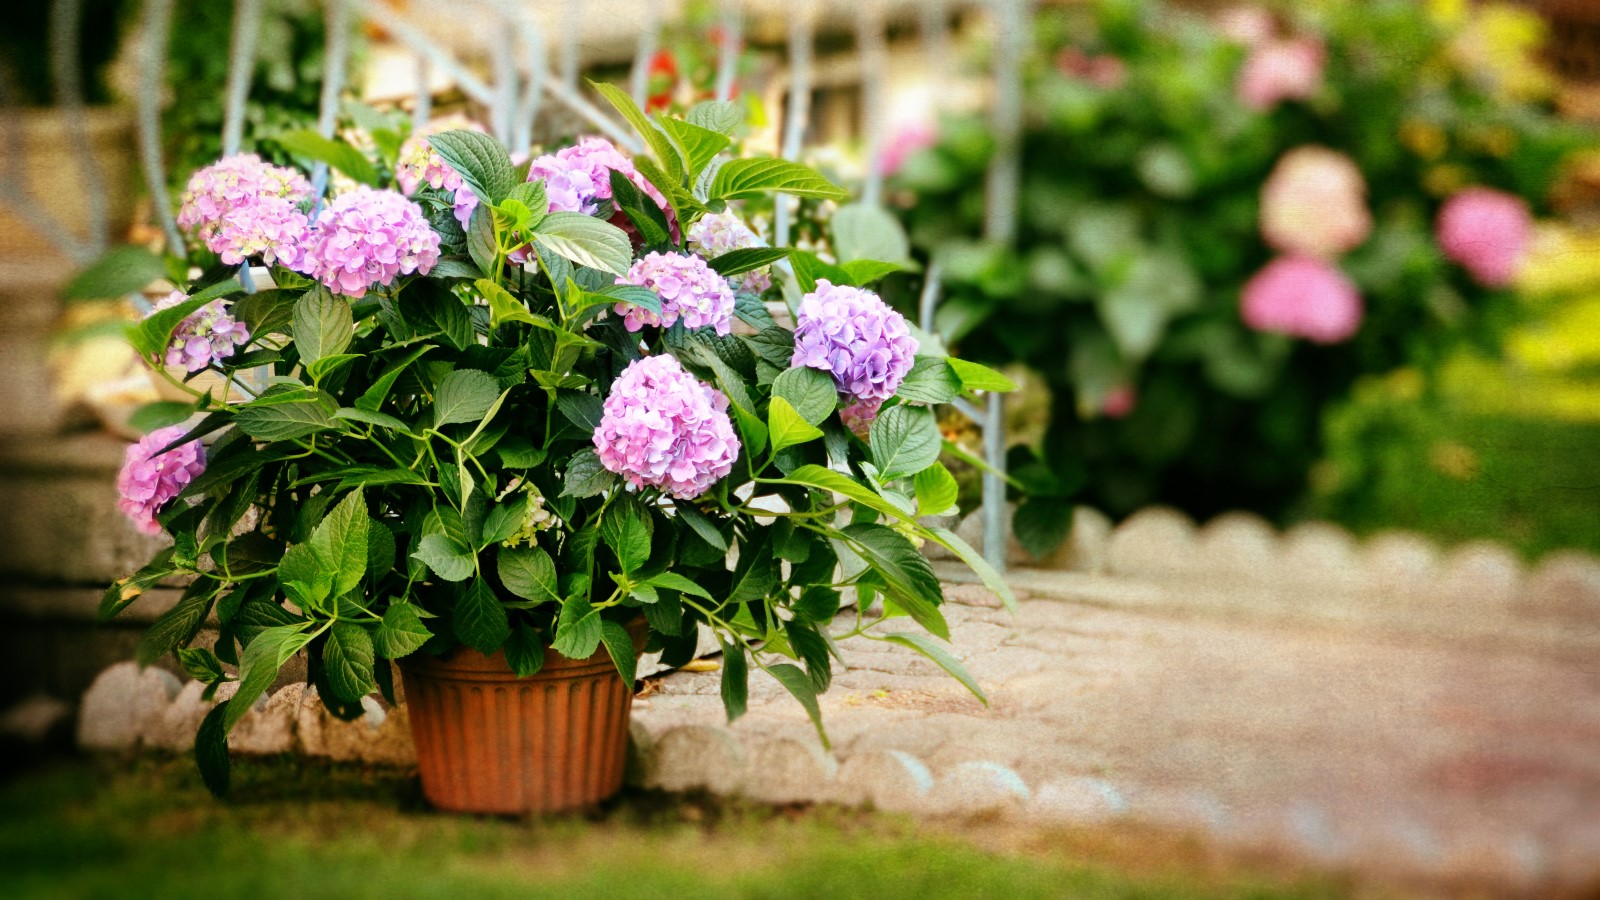 How to grow hydrangeas in pots: expert tips for containers